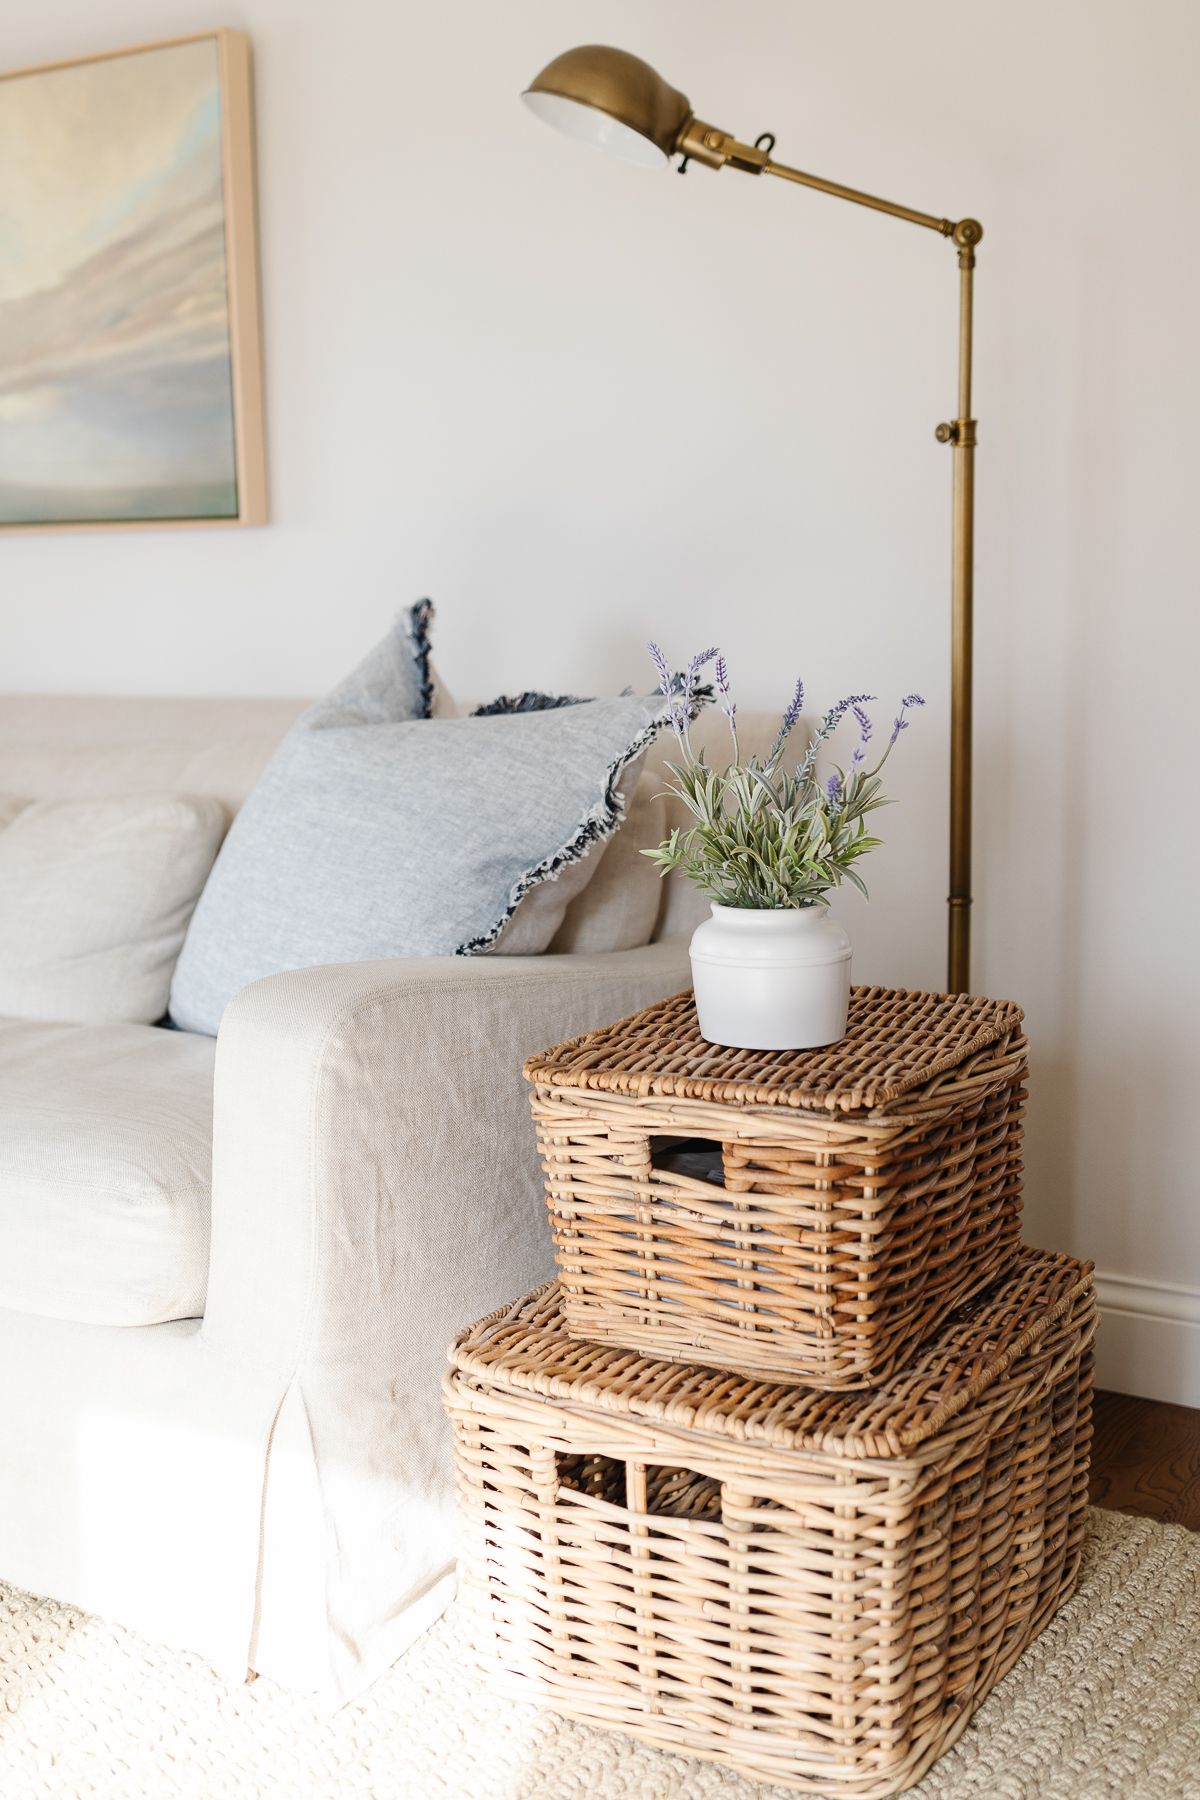 A family room with a linen sofa and baskets stacked for an end table